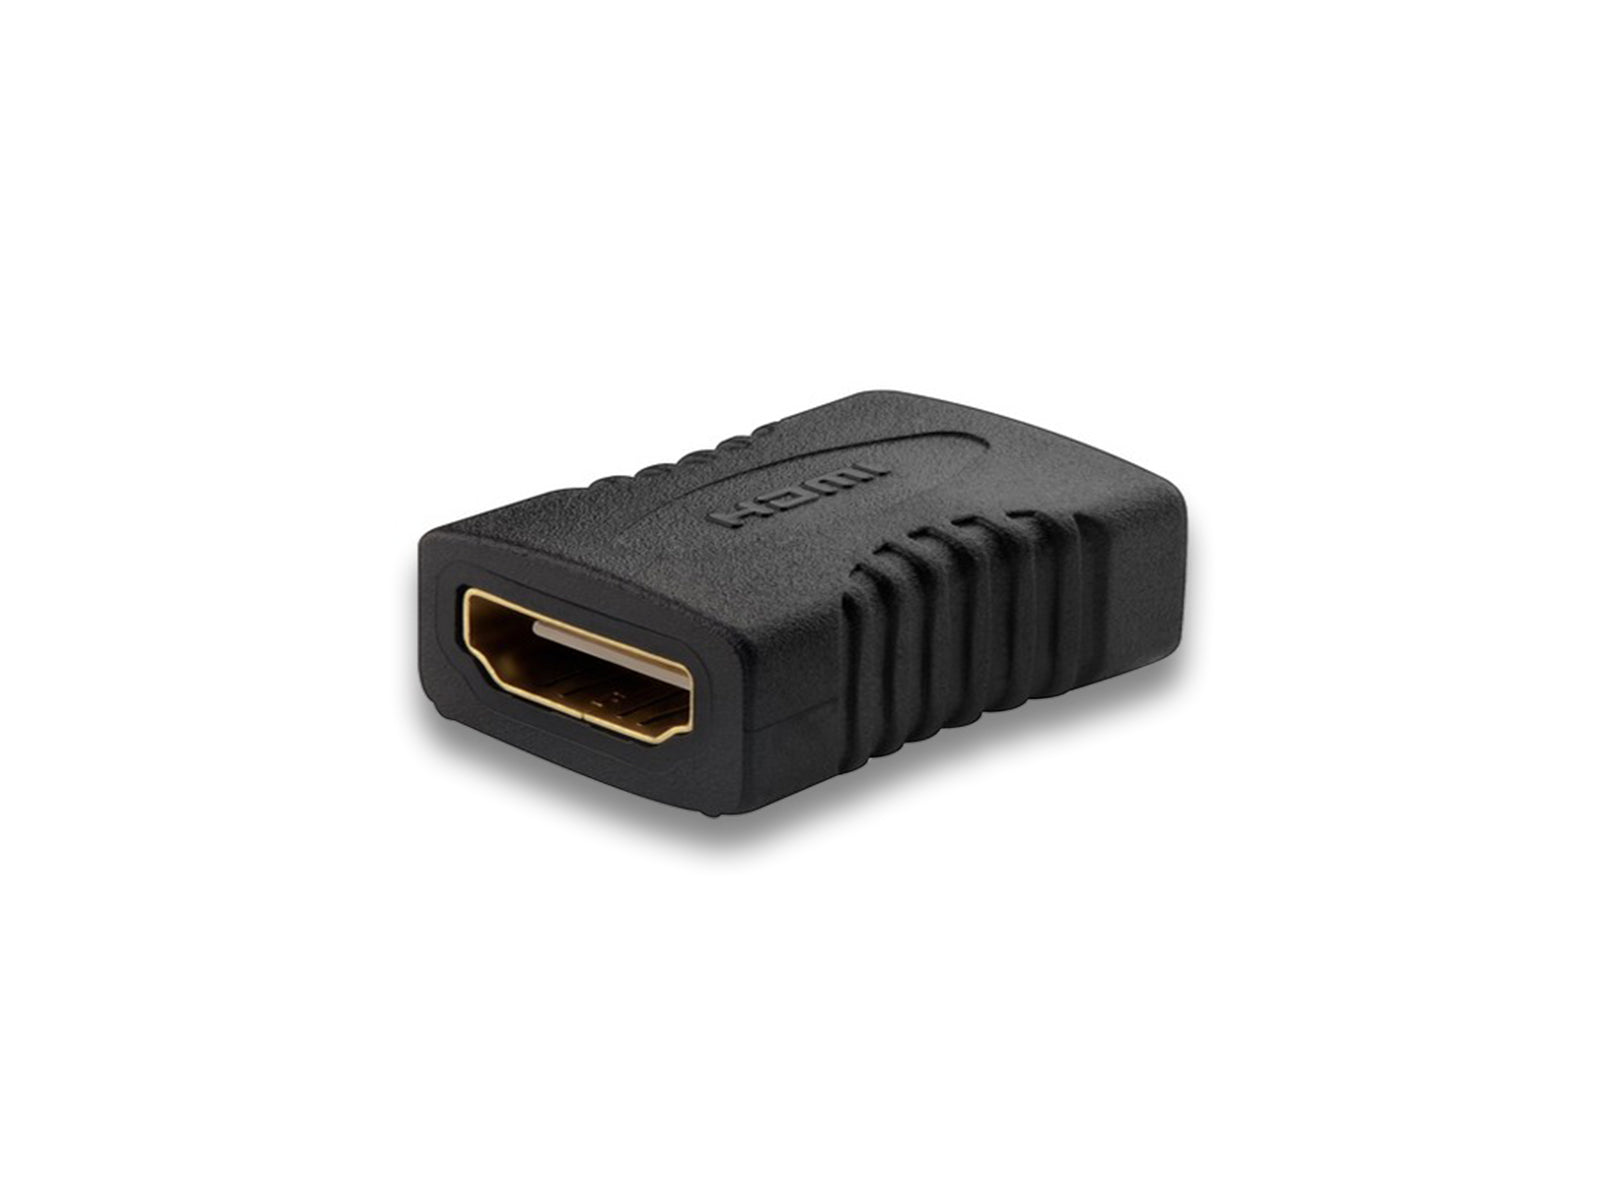 HDMI Coupler With Female To Female Connection Port View